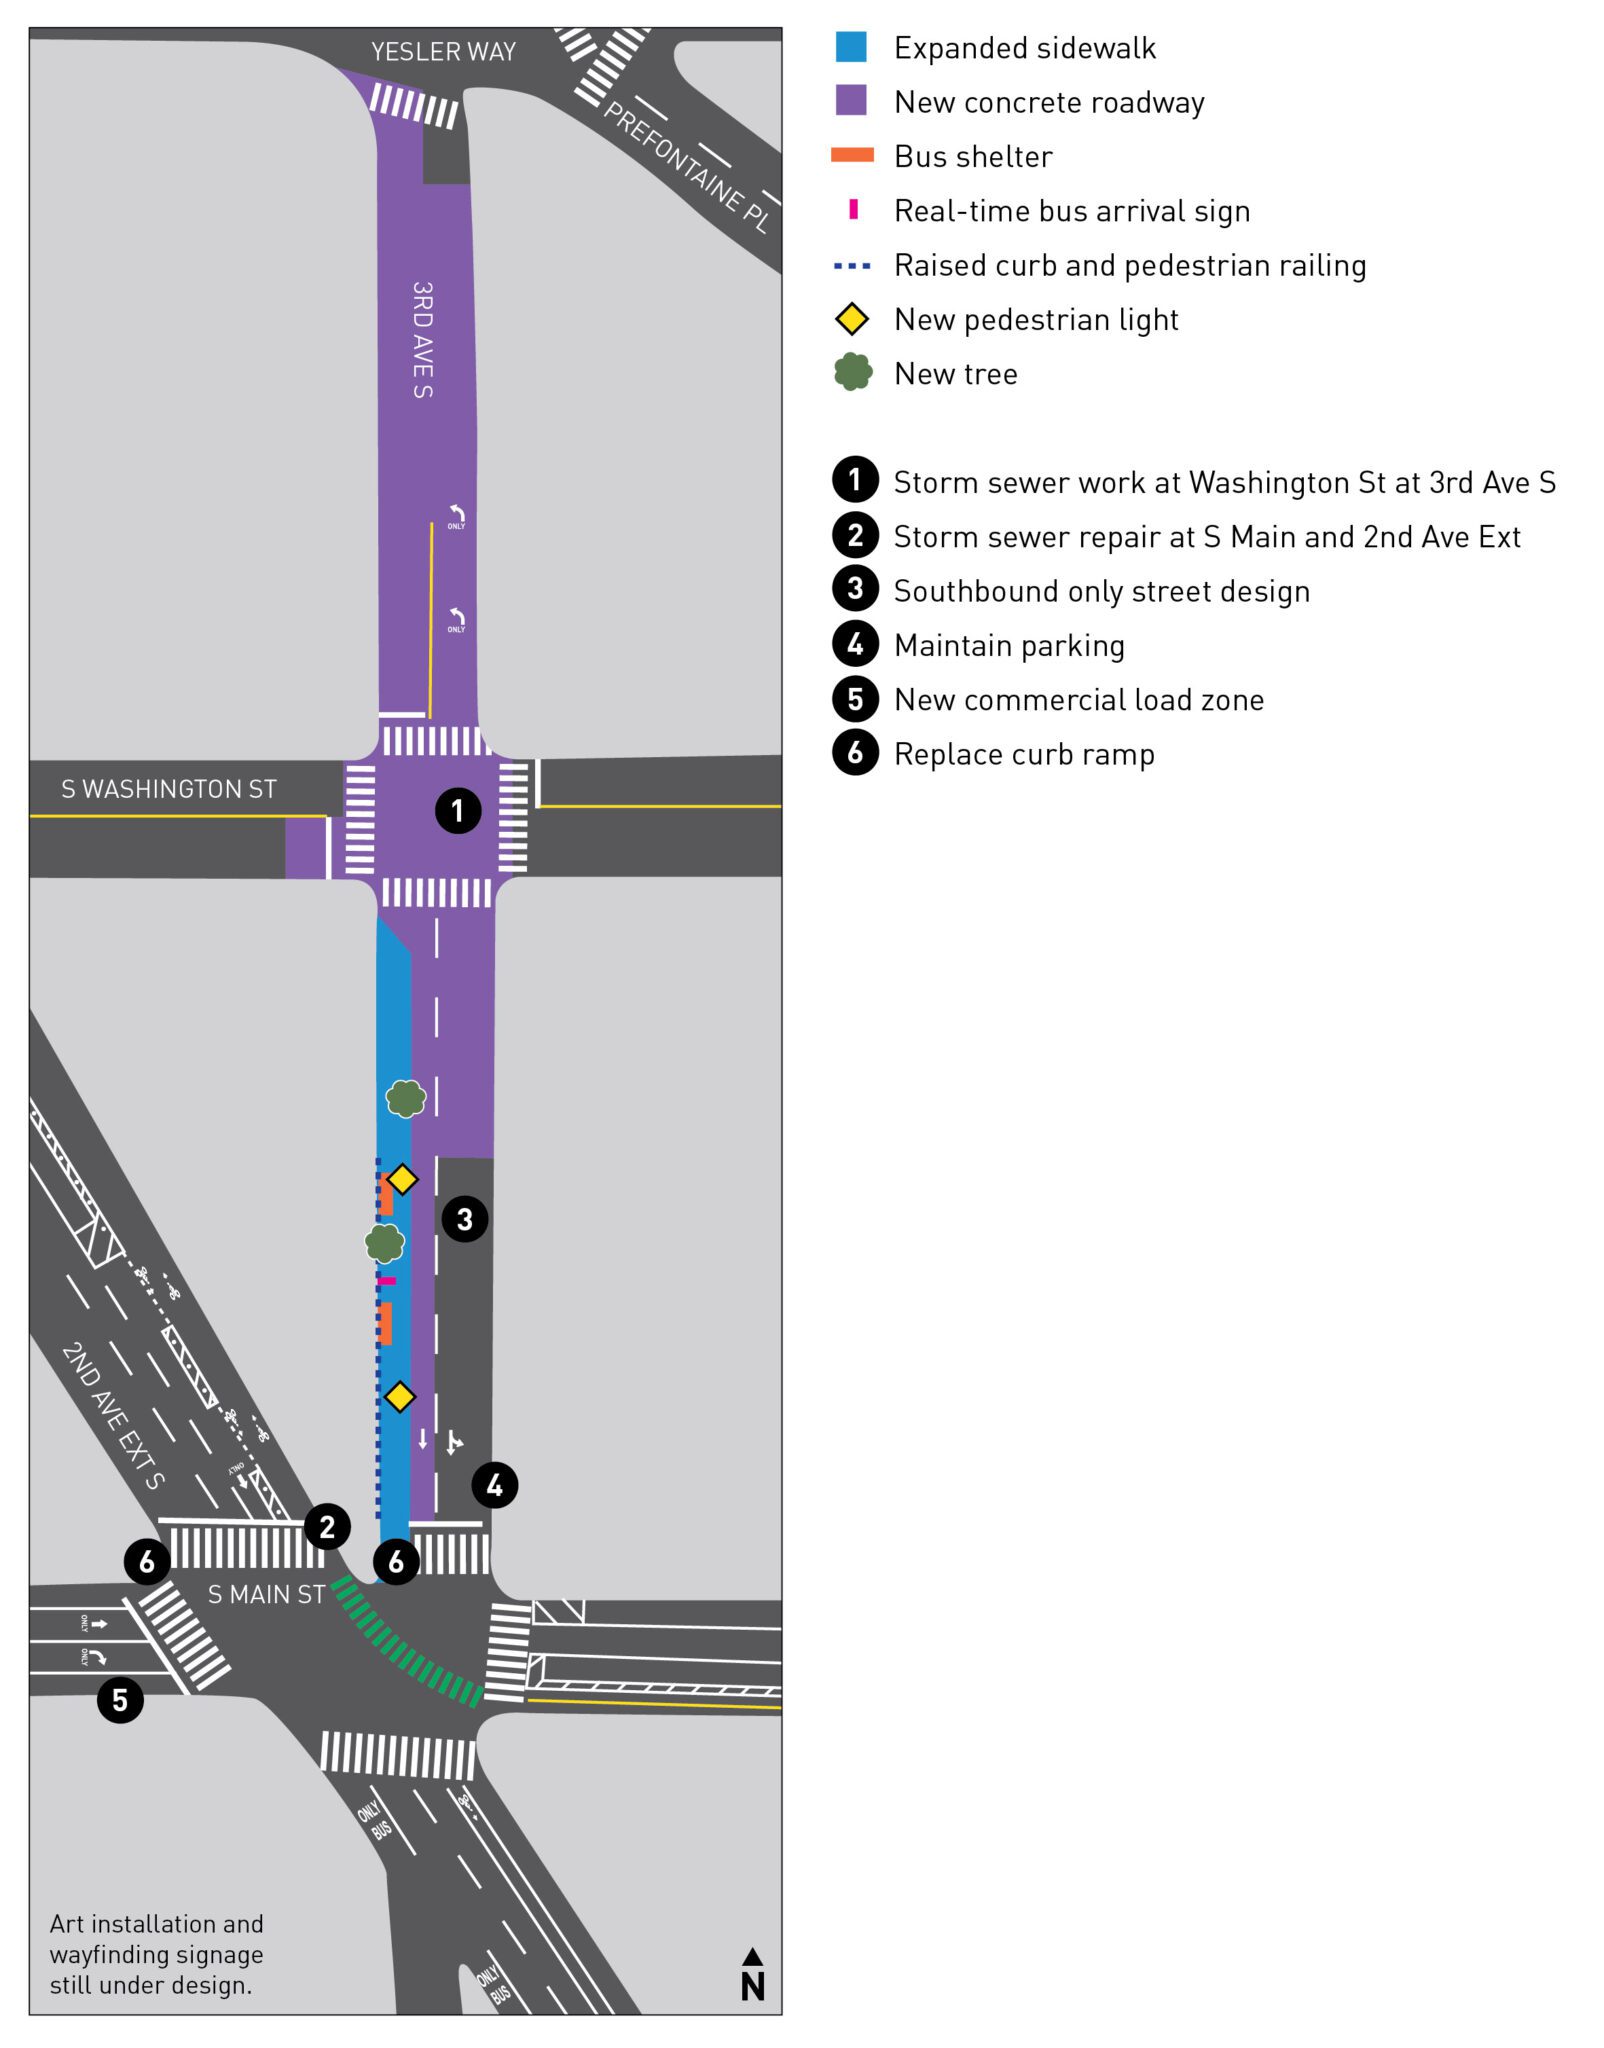 Map graphic showing improvements along 3rd Ave S between Yesler Way and S Main St. They include new concrete roadway, expanded sidewalks, new lighting, bus shelters, and more.